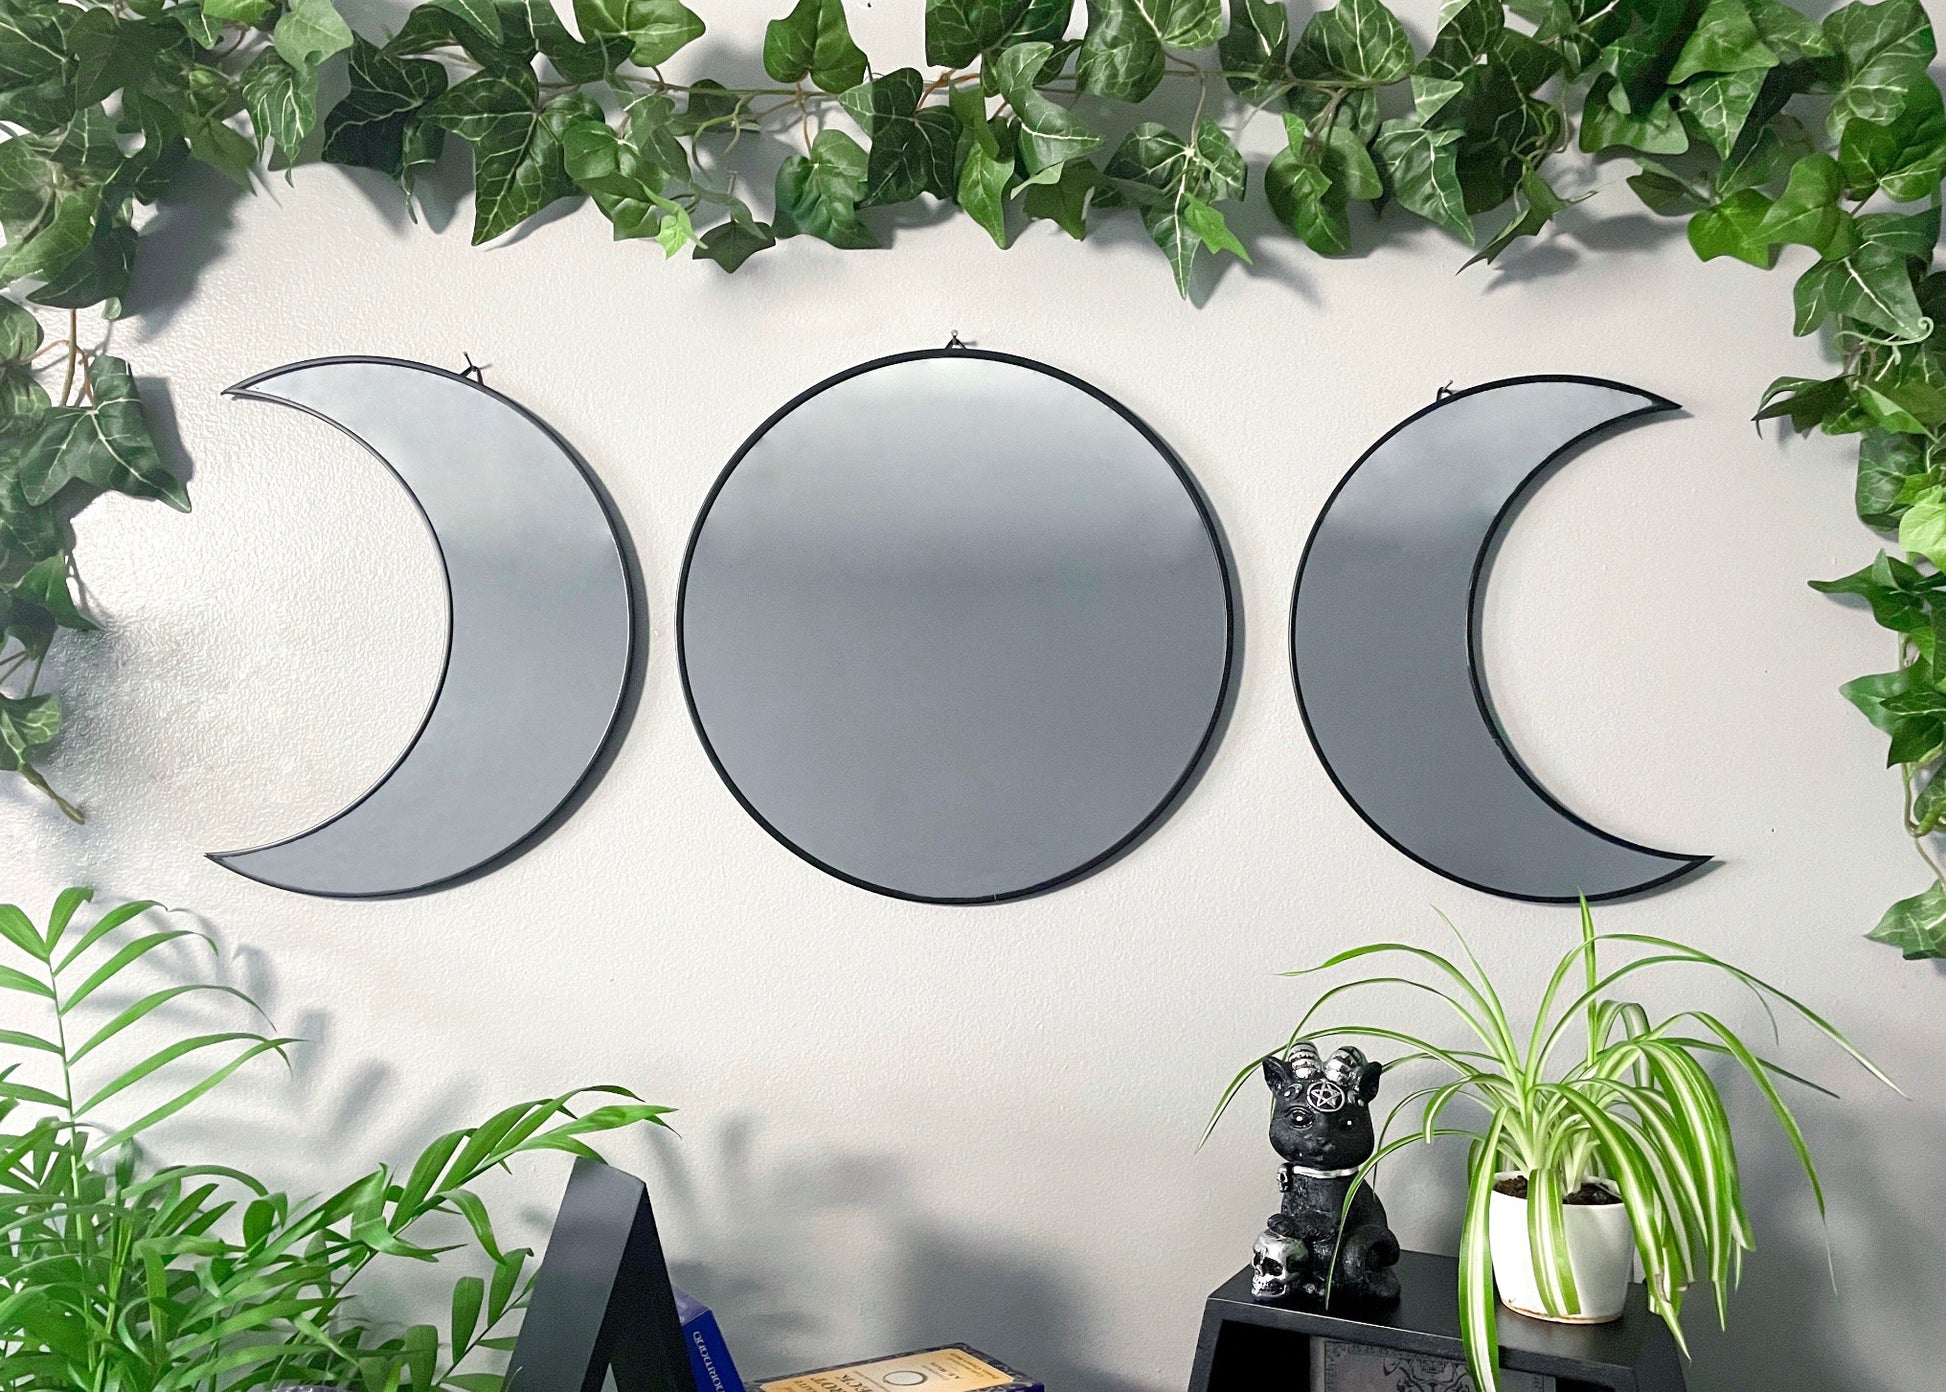 Pictured is a mirror in three pieces shaped like a triple moon three phases of the moon.